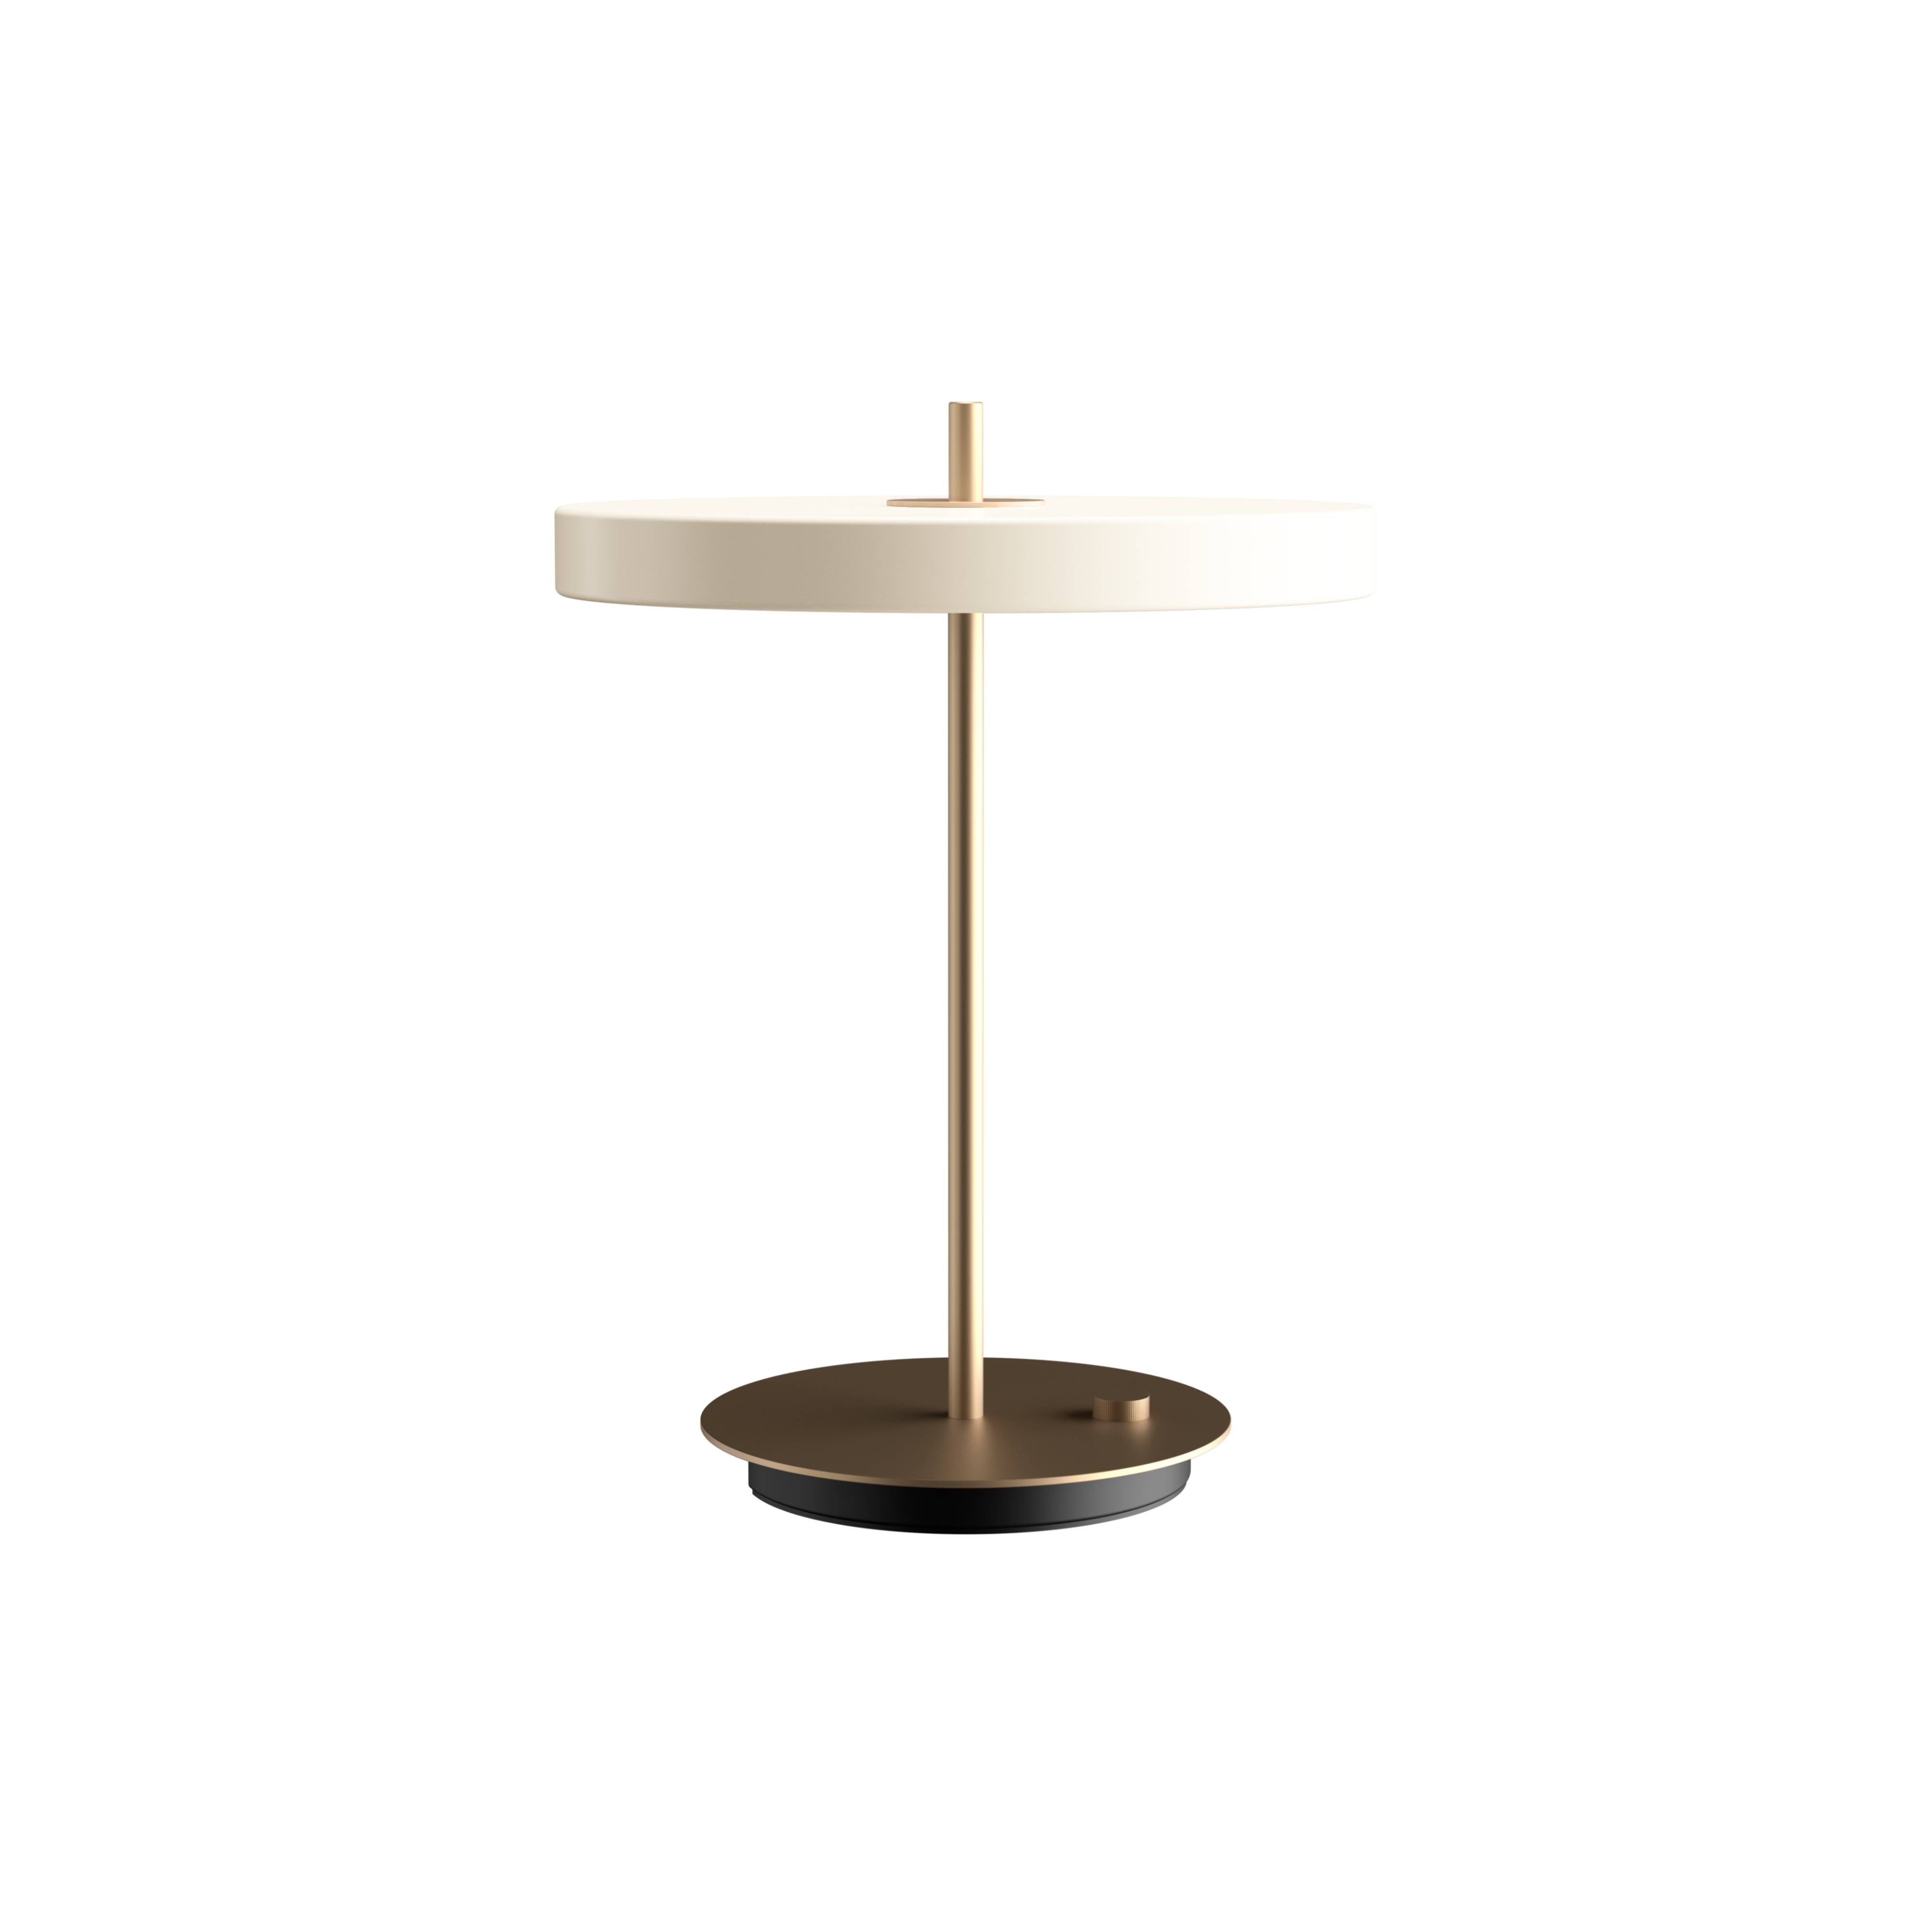 Asteria Table Lamp: Peral White